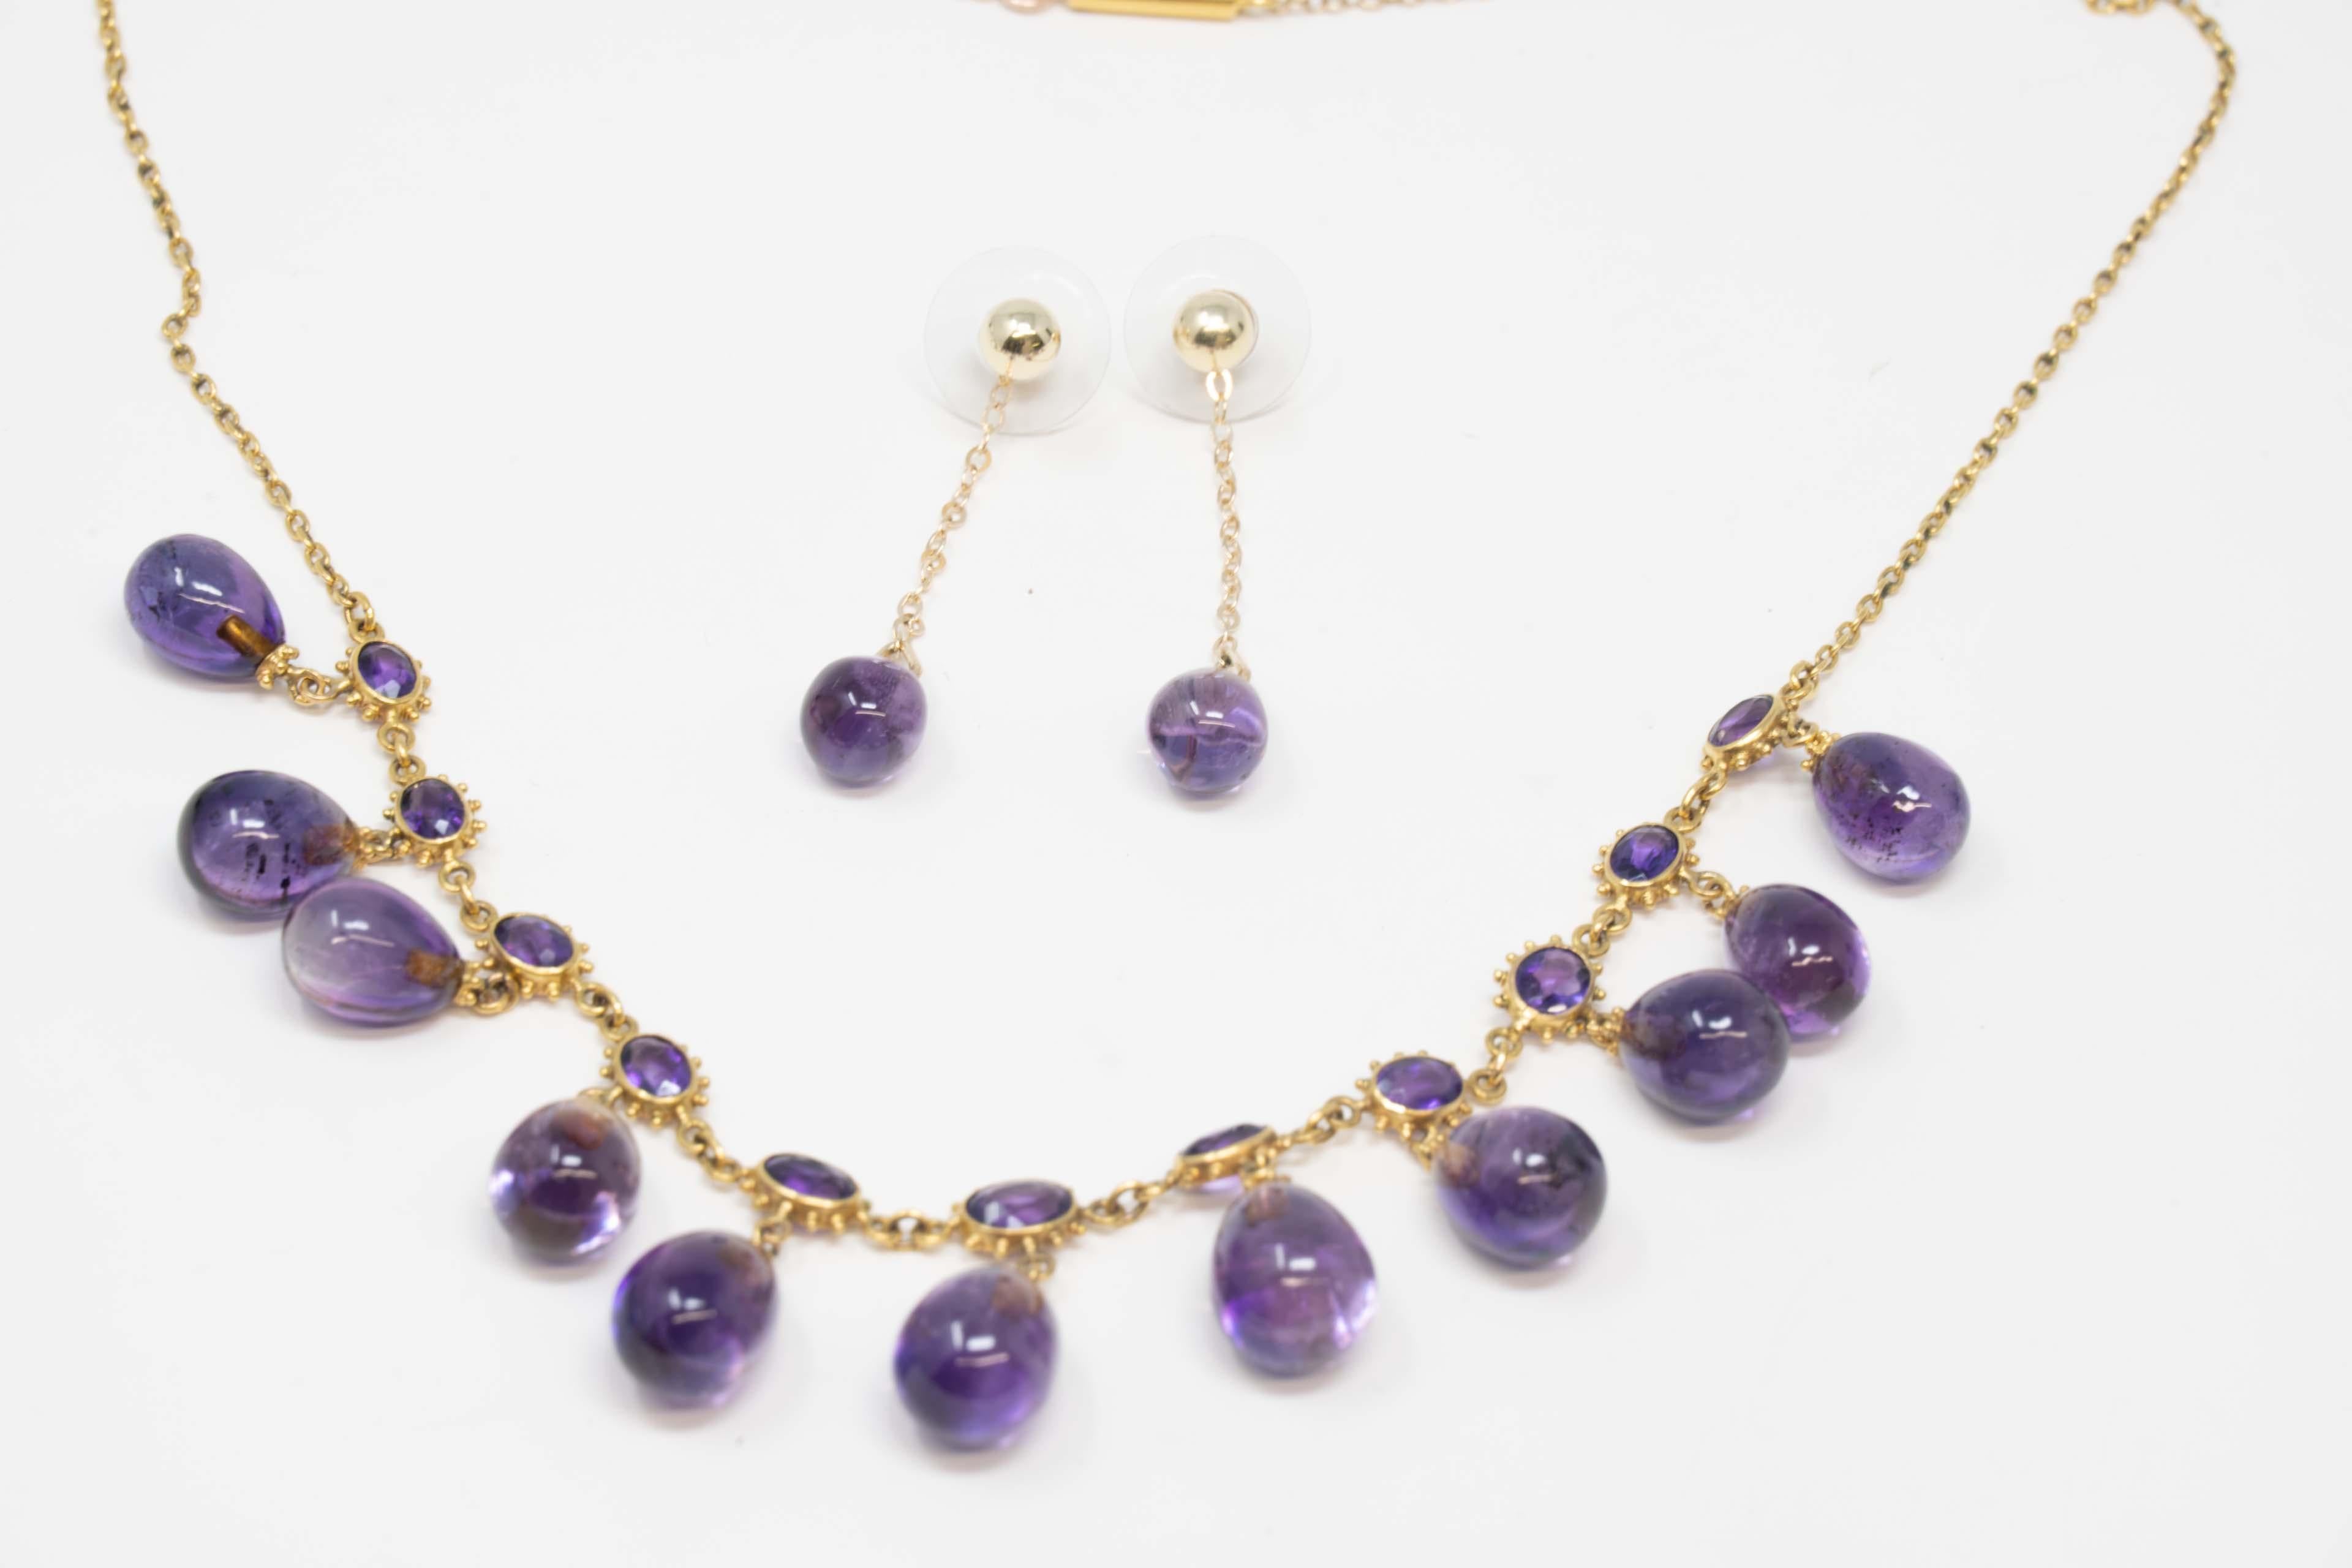 Women's 14k Yellow Gold & Natural Amethyst Stone Necklace & Earrings For Sale